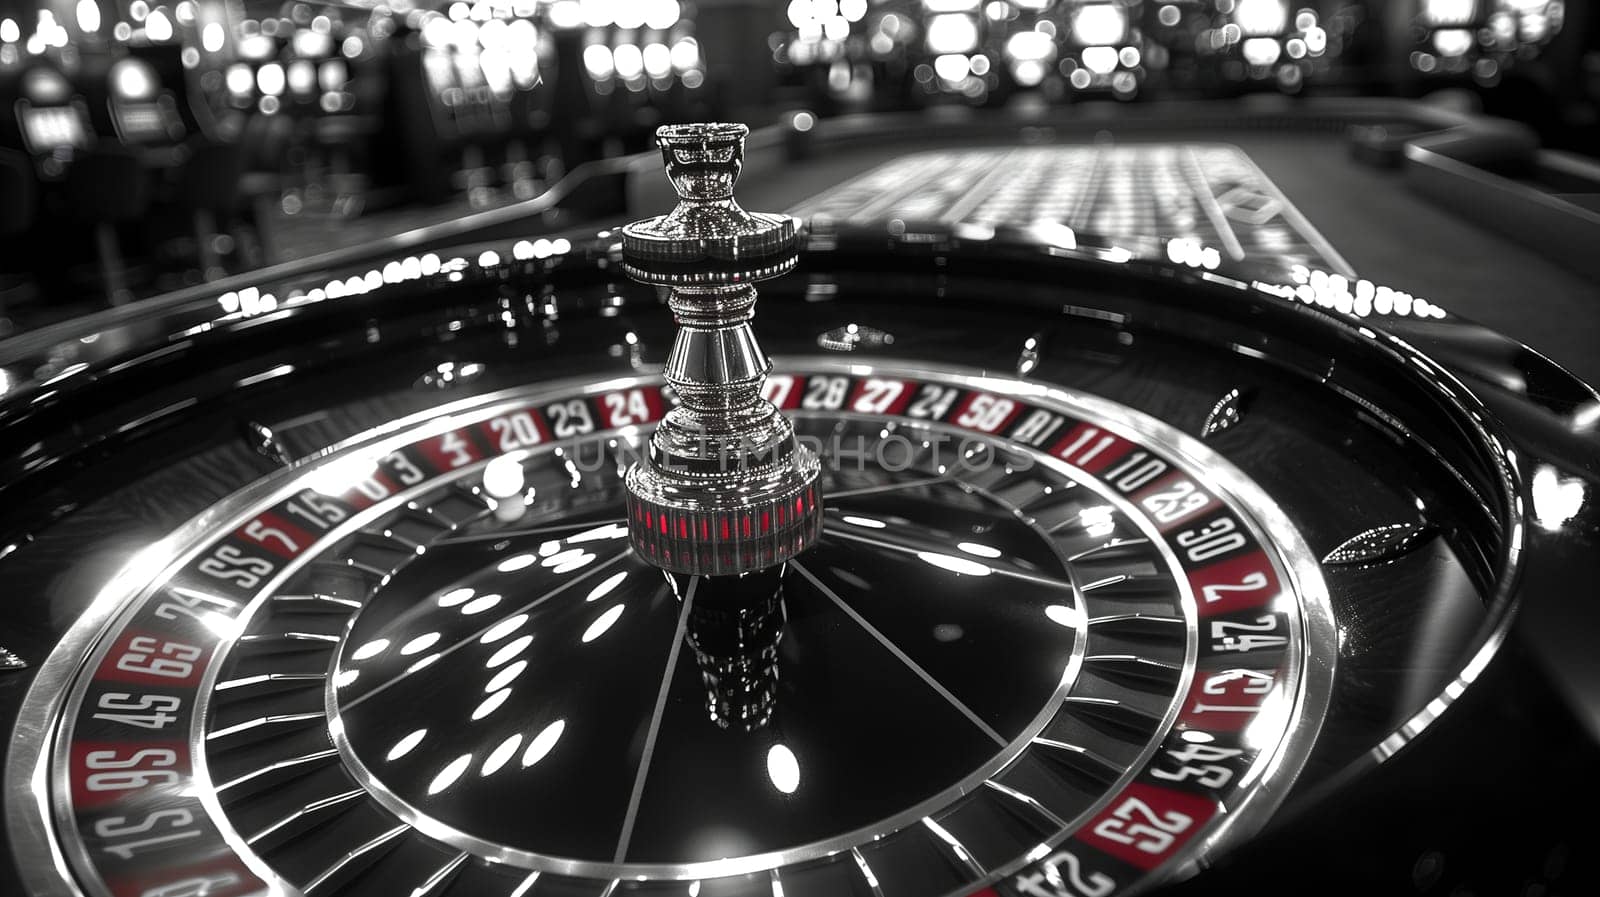 A black and white photo capturing a casino roulette wheel spinning, with the ball about to land on a number. The table is surrounded by players placing bets, adding to the tense atmosphere.